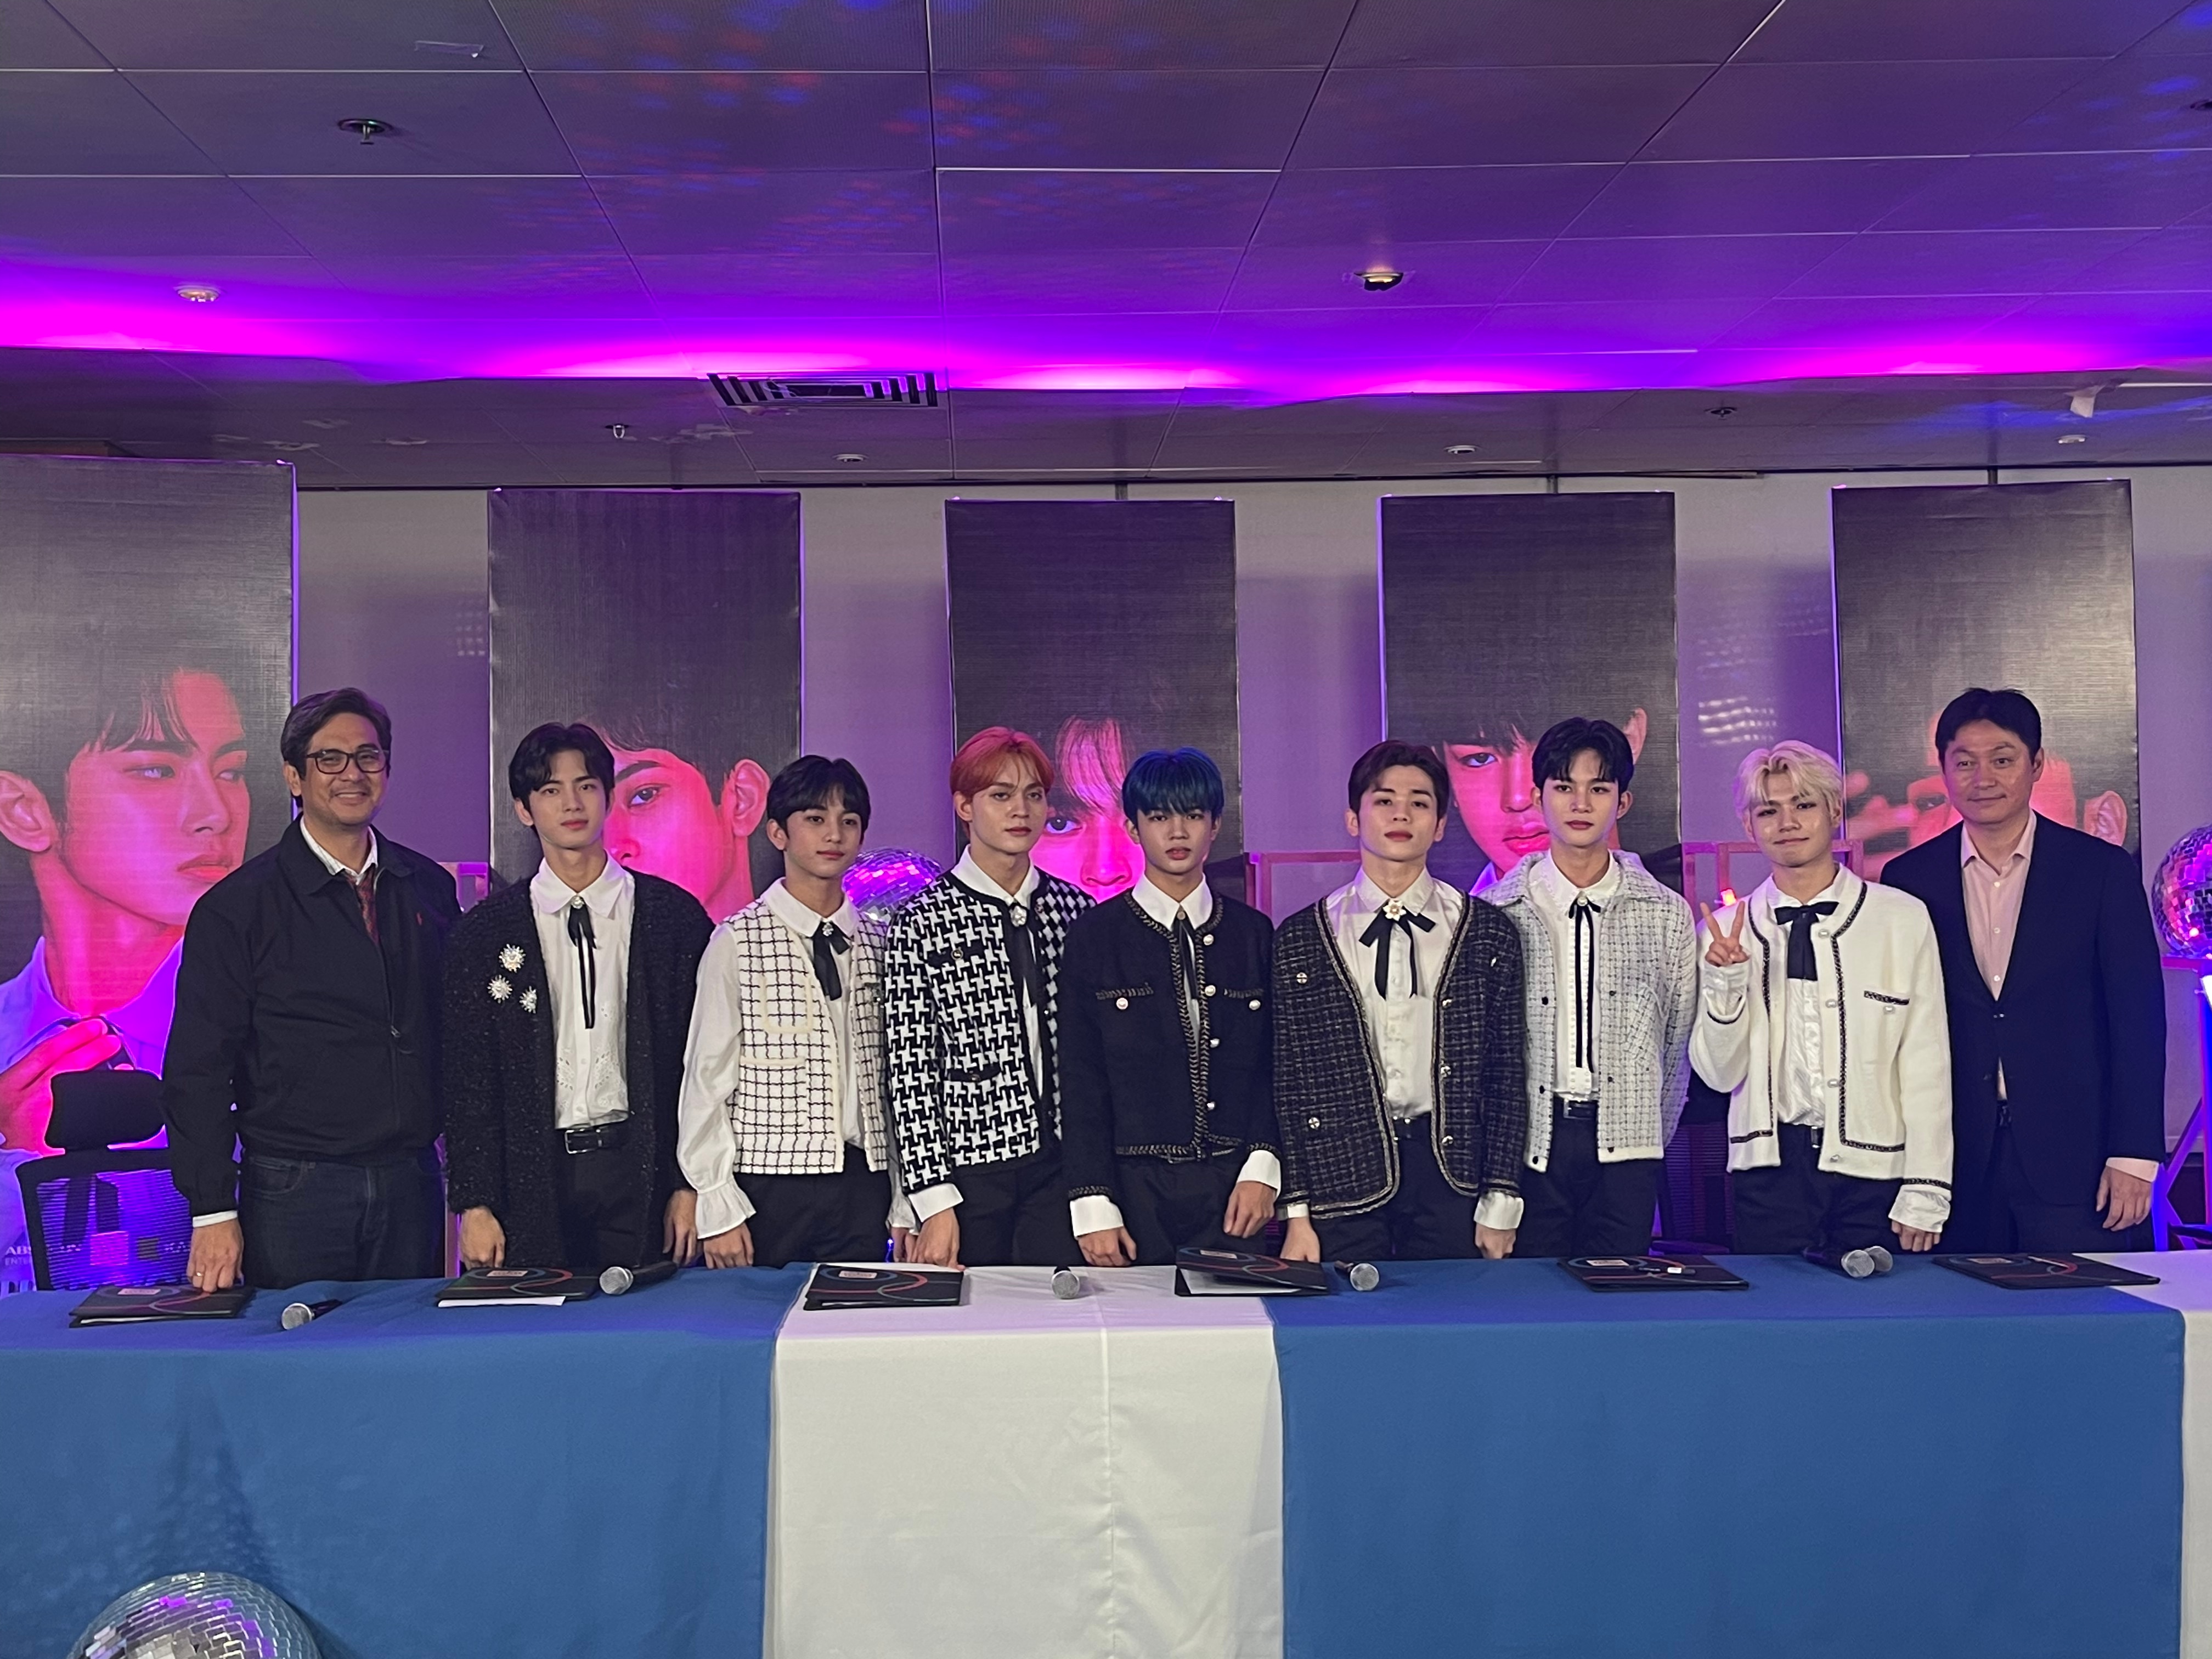 HORI7ON begins global pop group journey; officially part of ABS-CBN and MLD Entertainment